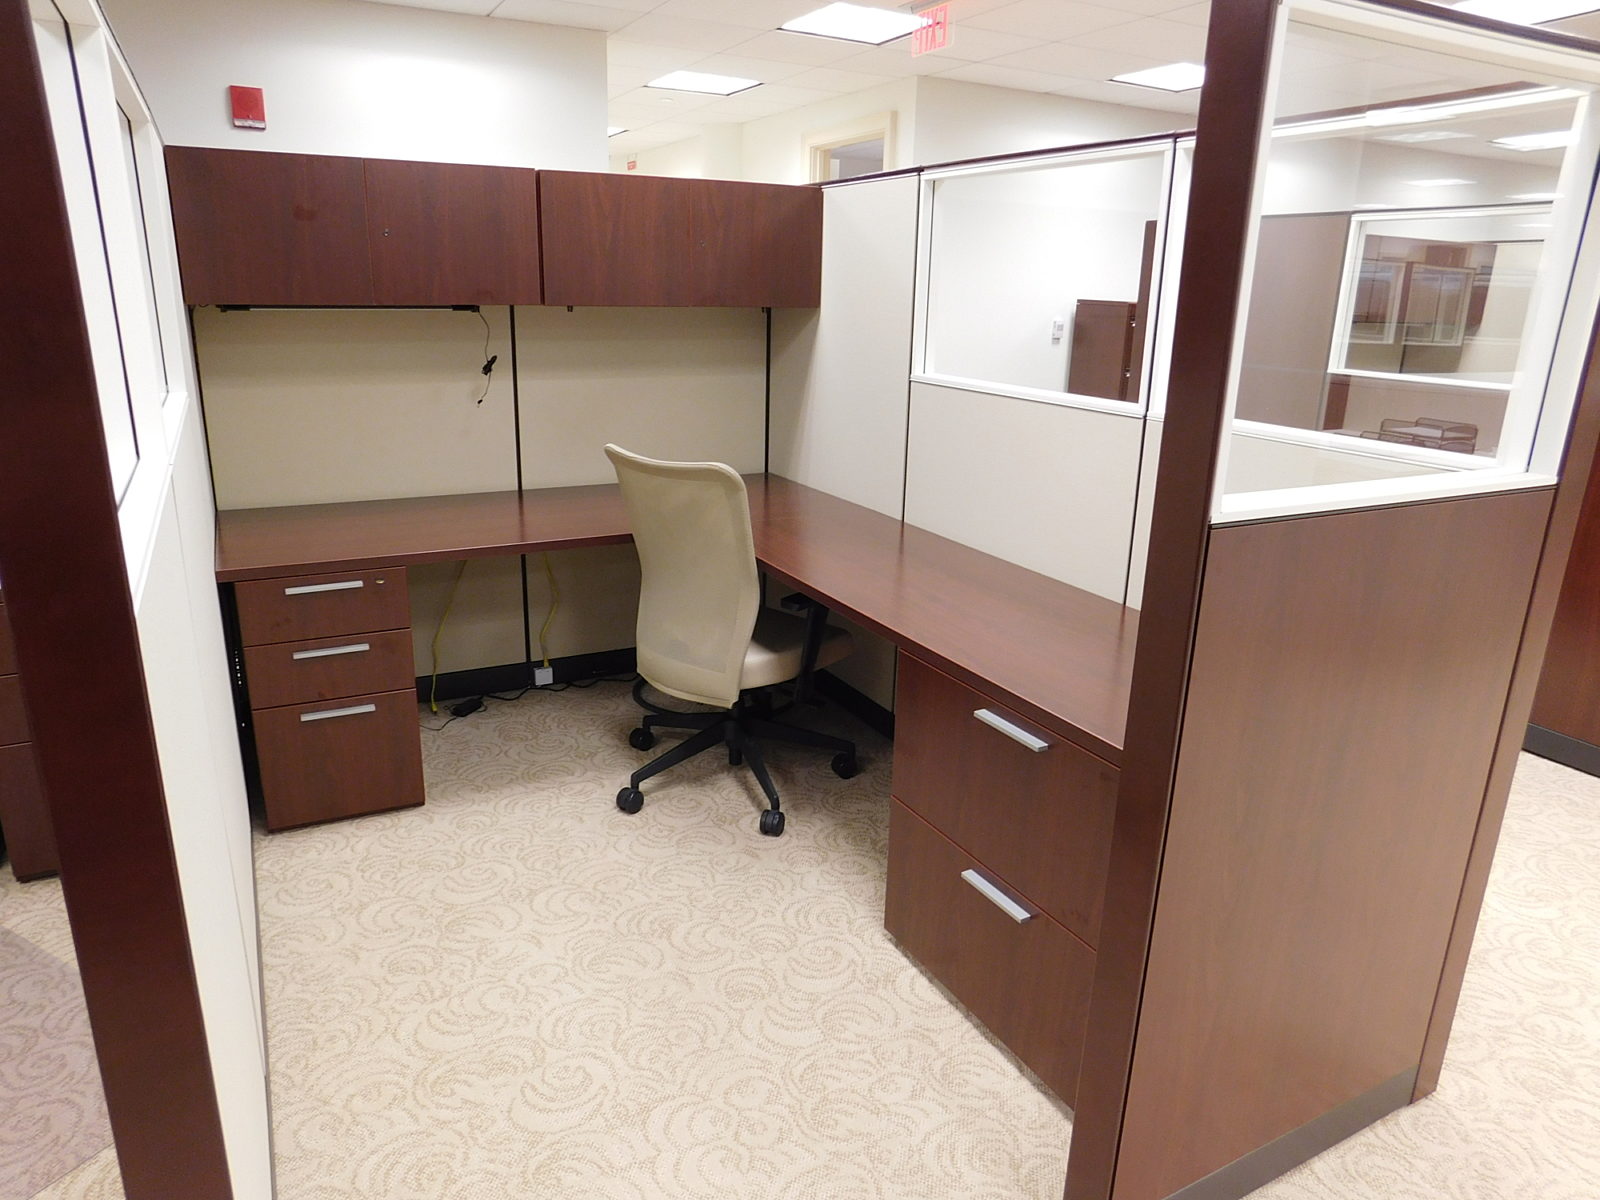 L-shape workstation with dark wood worksurfaces and storage, light fabric panels inside, cream color task chair